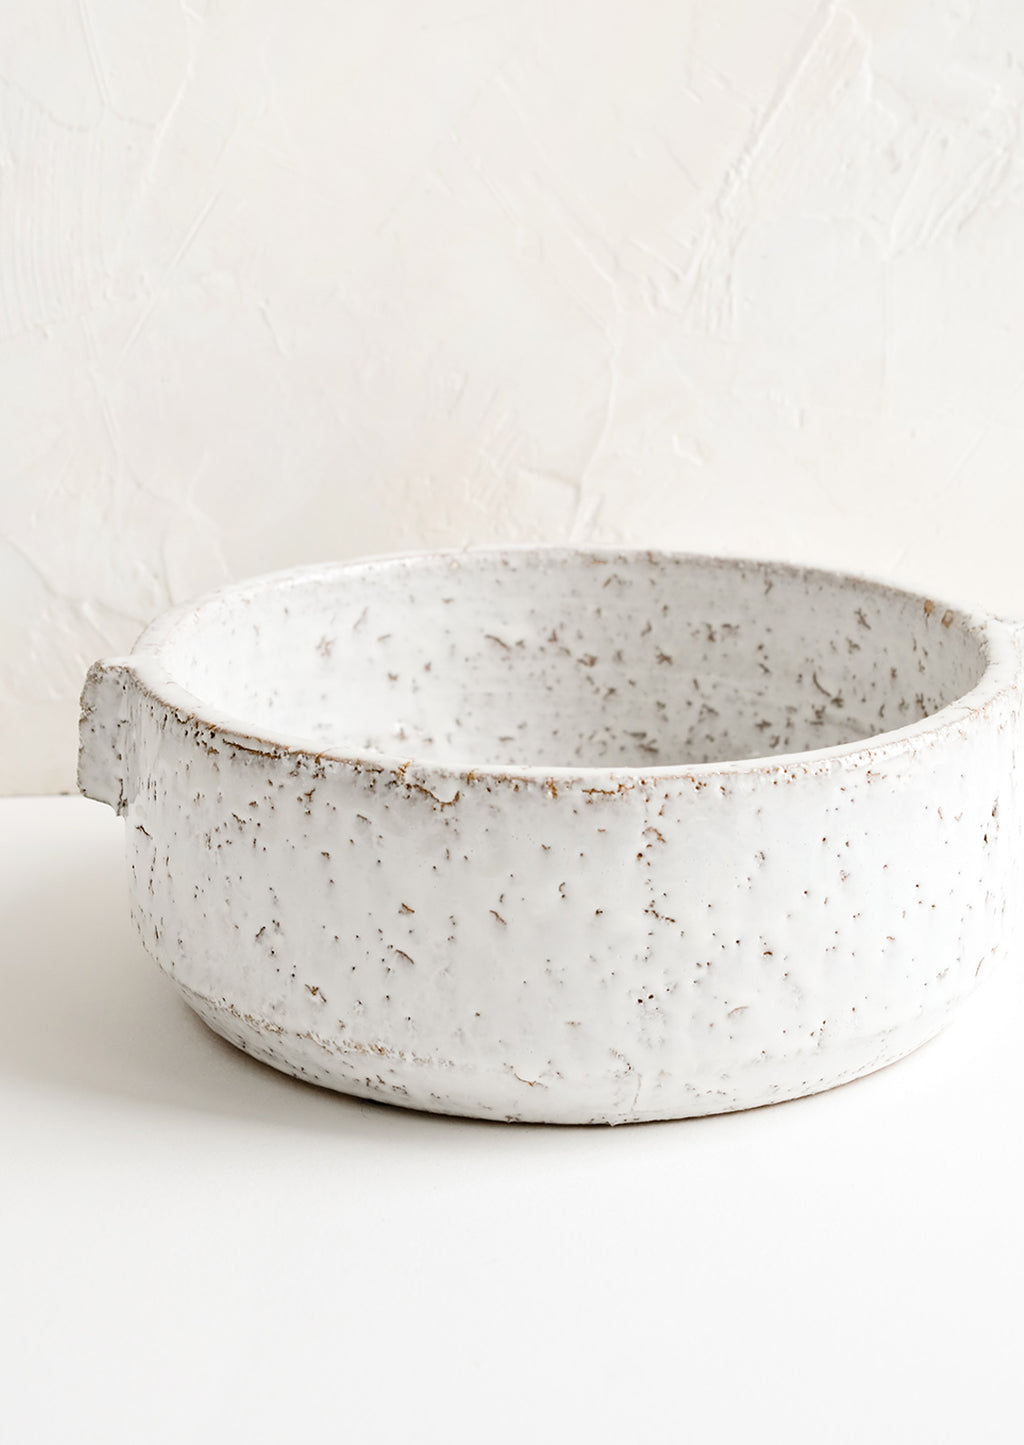 Large: A round white serving bowl in textured glaze.